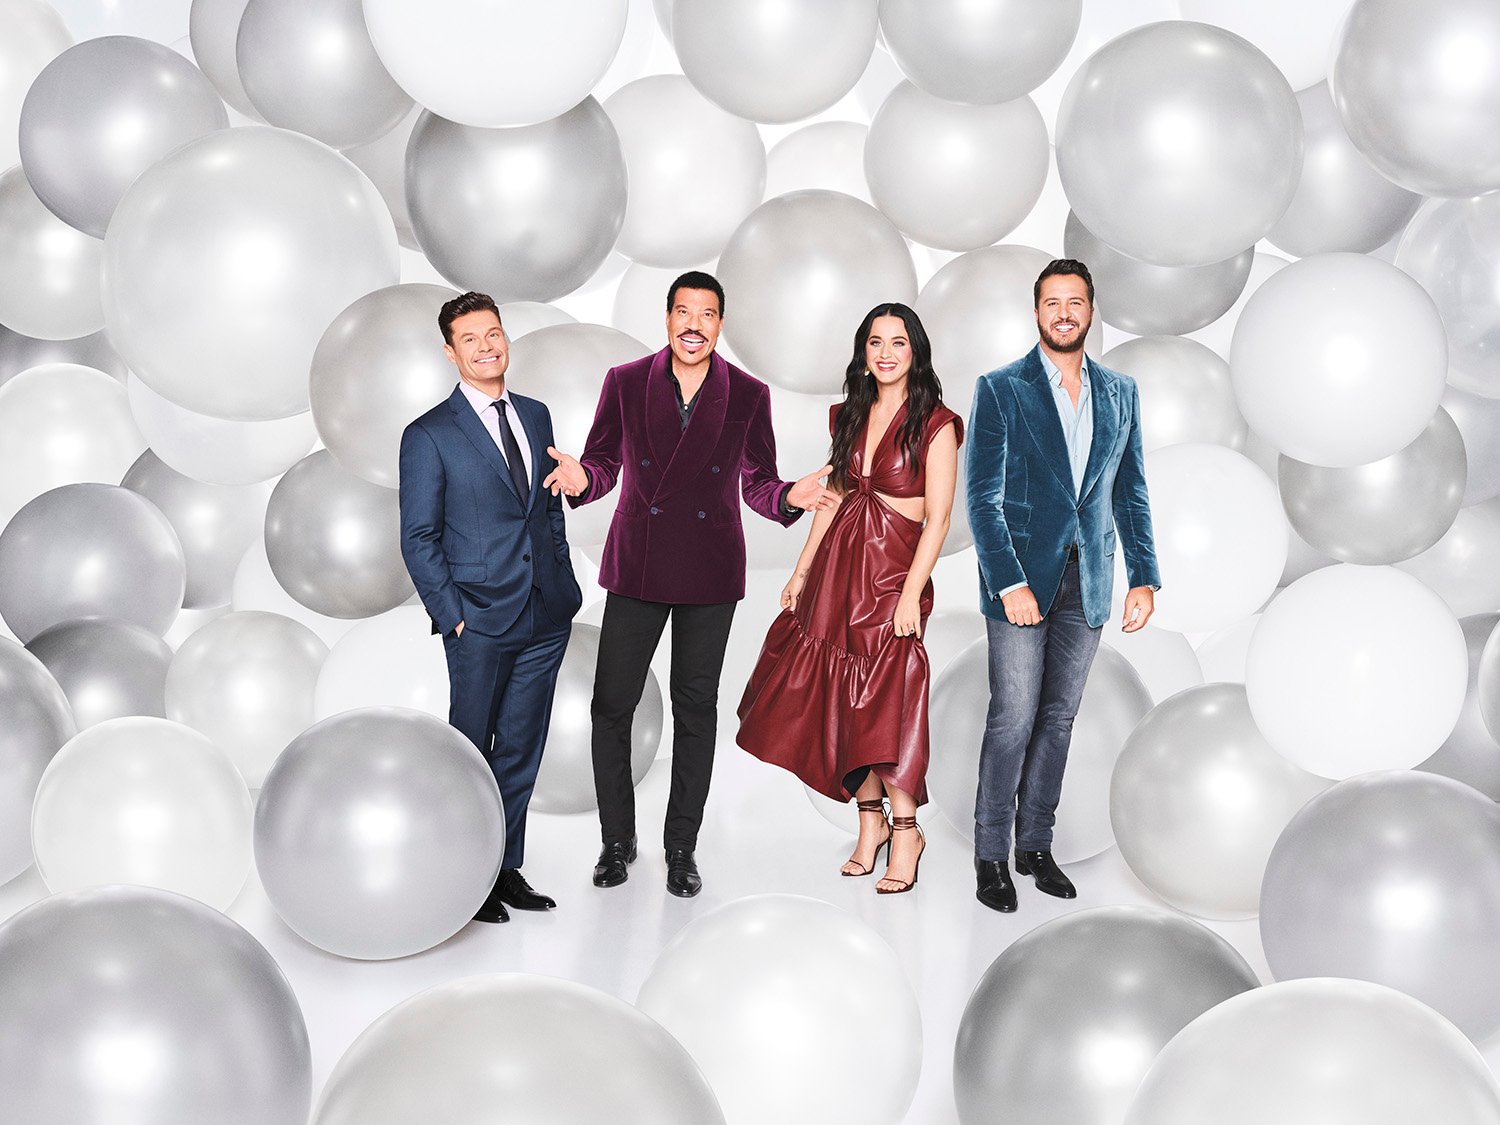 American Idol host Ryan Seacrest and judges Lionel Richie, Katy Perry, and Luke Bryan